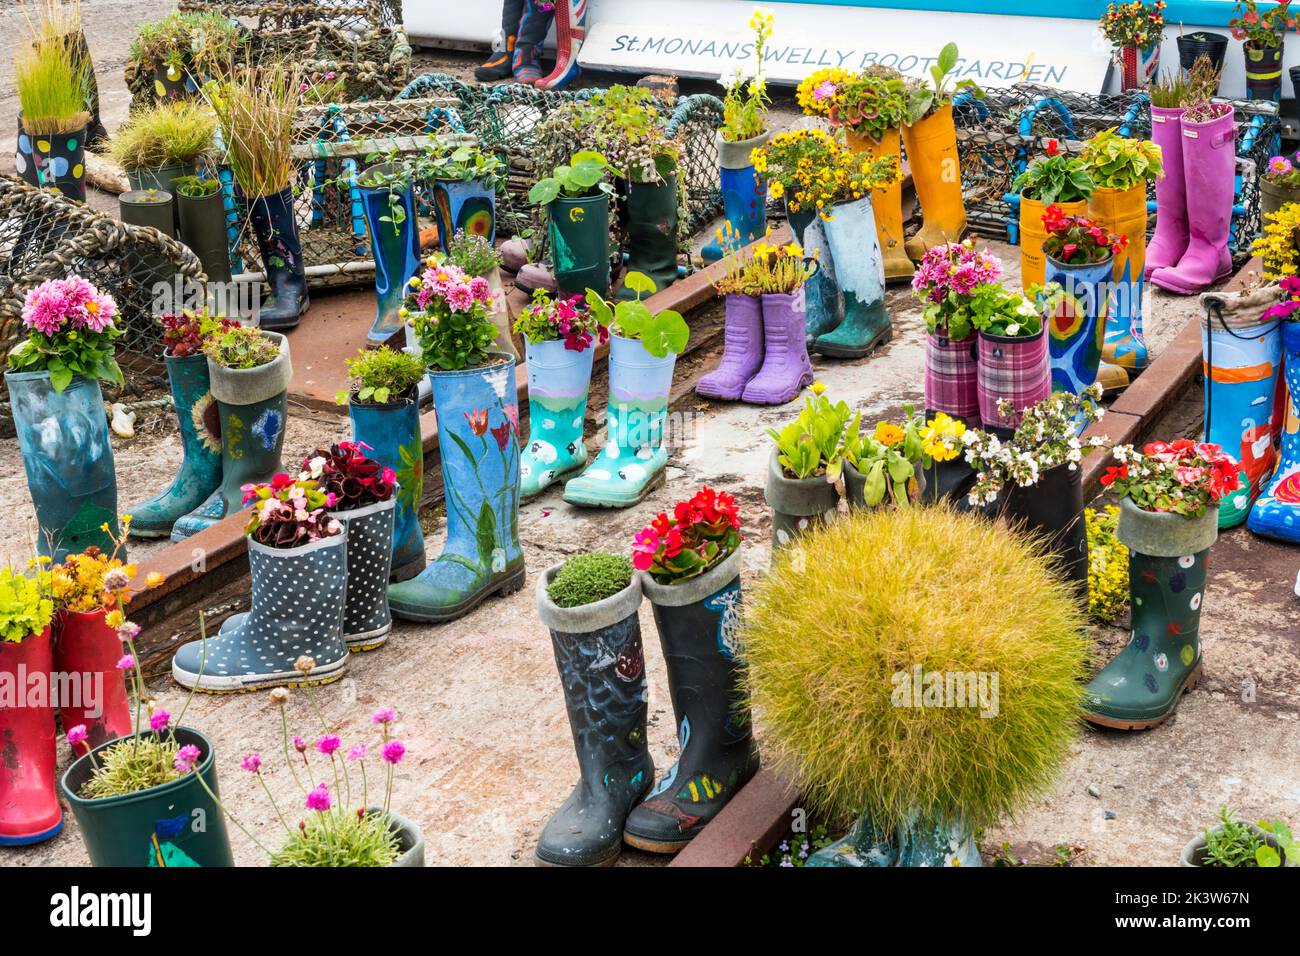 The St Monans Welly Boot Garden in the village of St Monans in the East Neuk of Fife, Scotland. Stock Photo